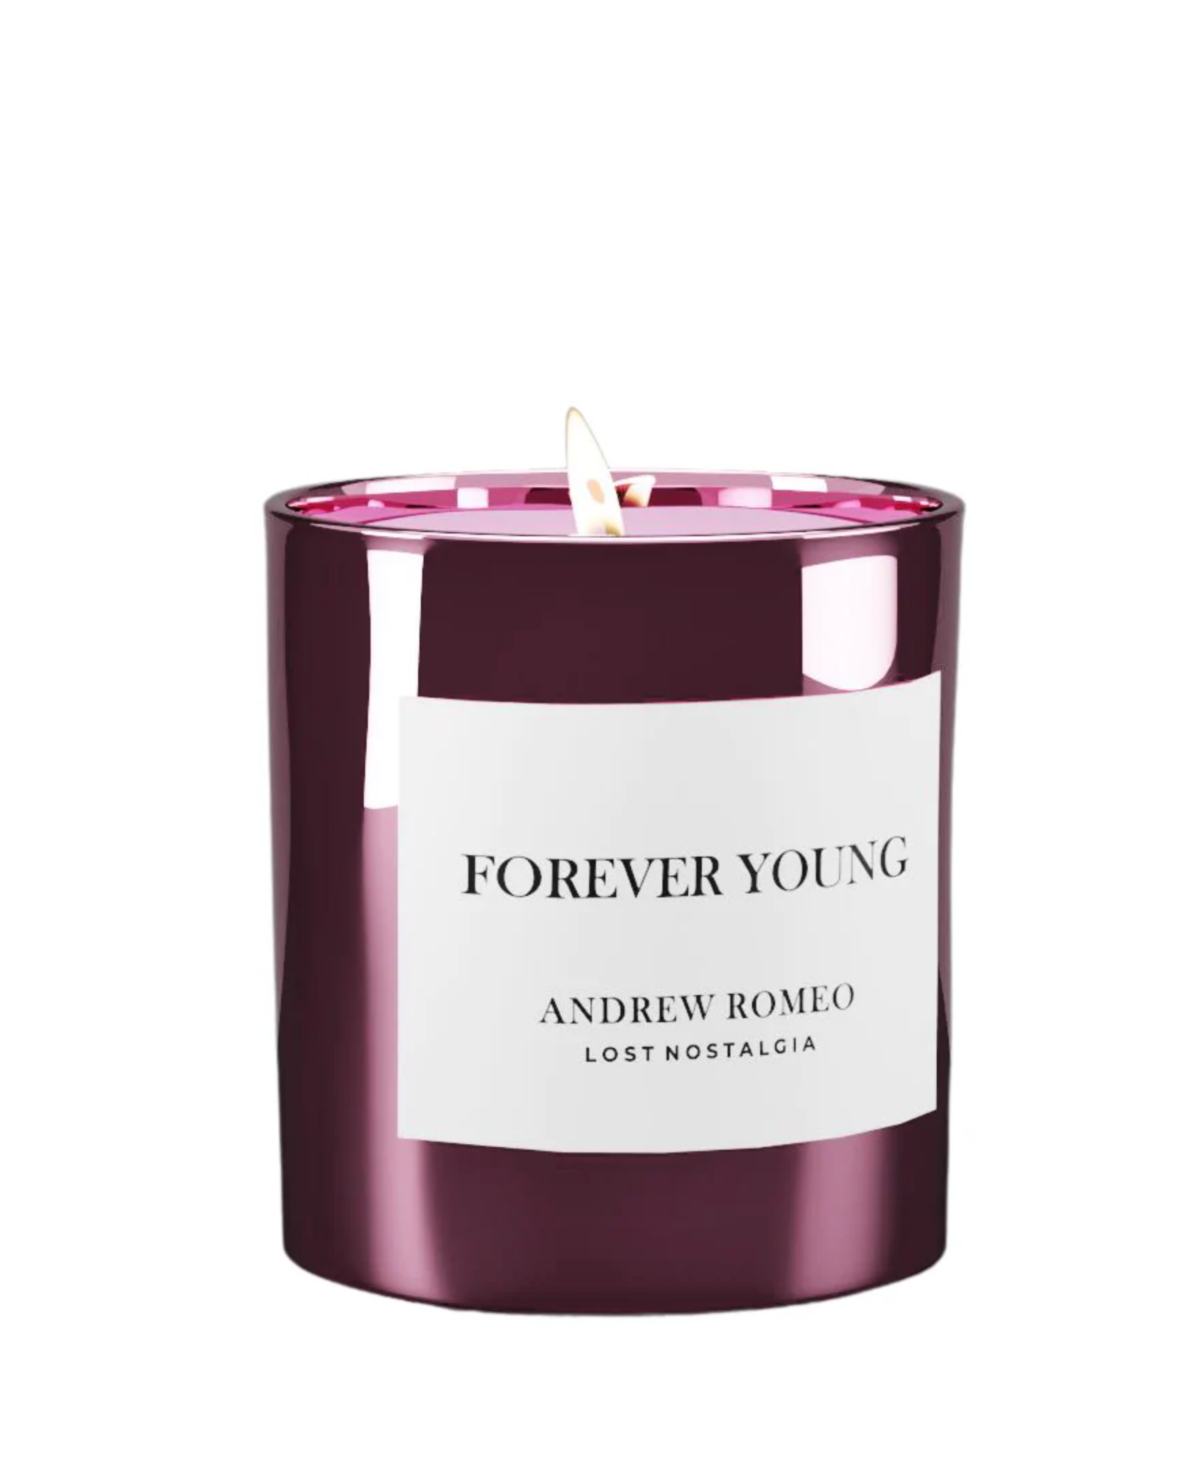 Forever Young Nostalgic Candle, 80s Inspired, 8.8 oz